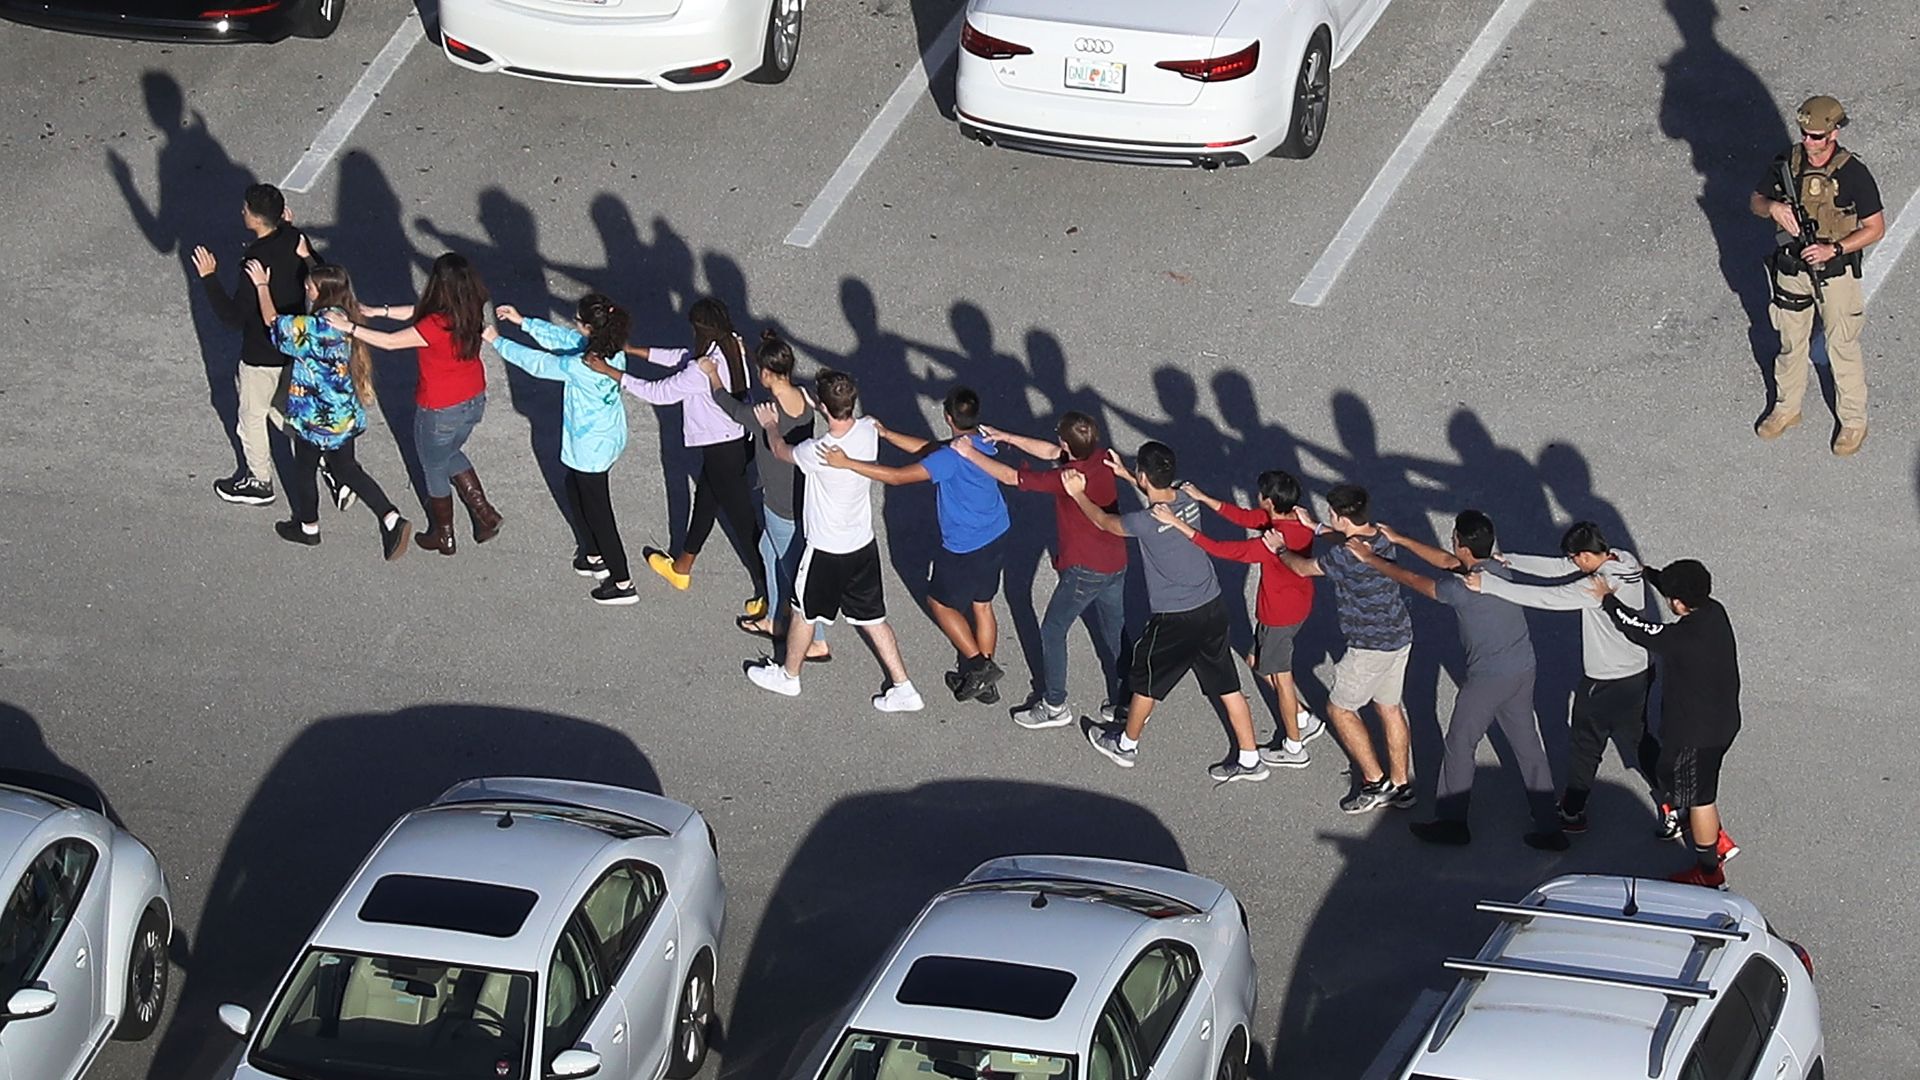 People being brought out of the Marjory Stoneman Douglas High School after a shooting at the school on February 14, 2018 in Parkland, Florida. 